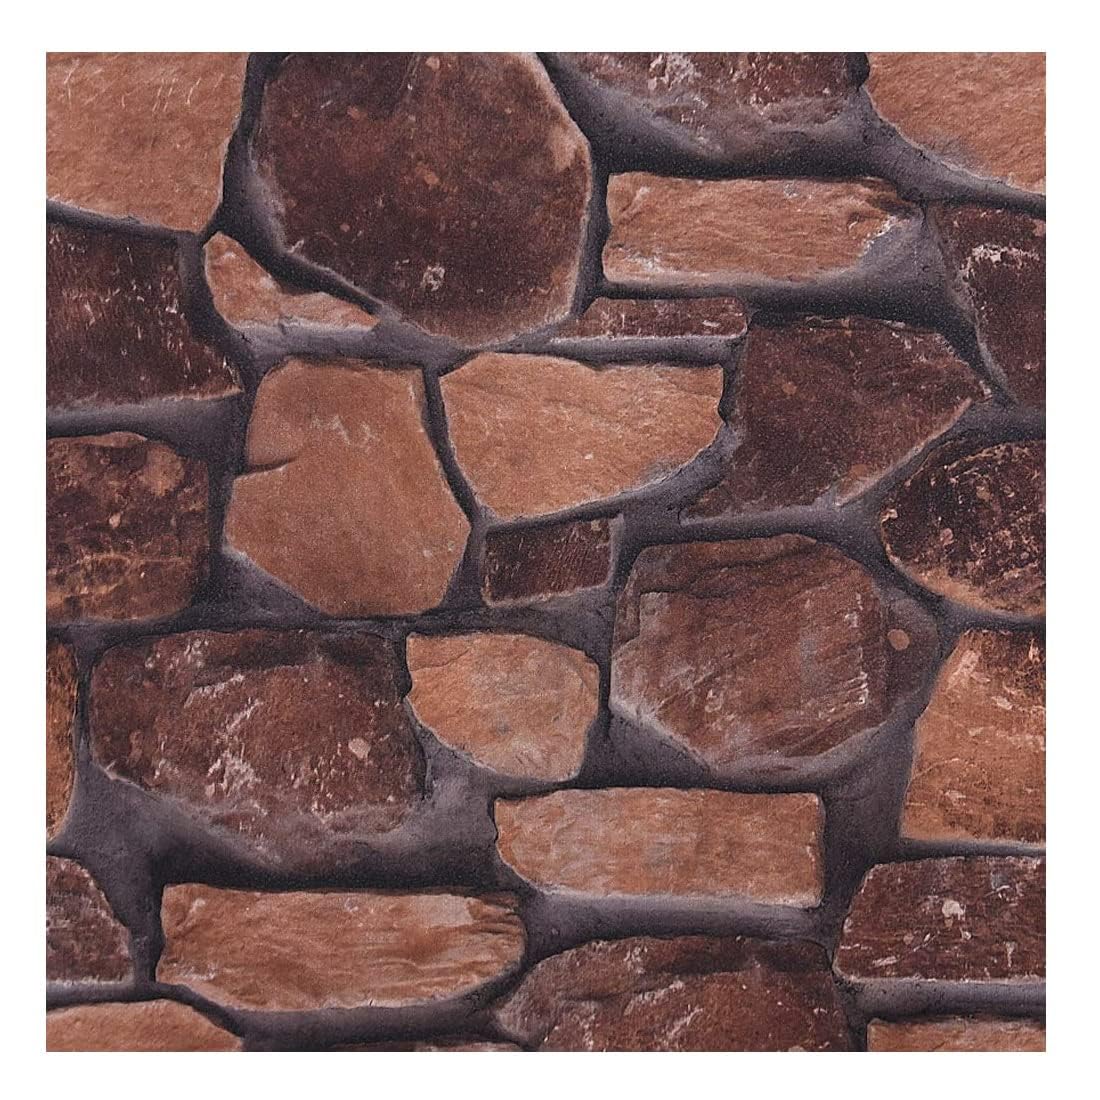 3D Latest Stone Design Dark Brown Wallpaper Roll for Home Walls 57 Sq Ft (0.53m or 33 Feet)